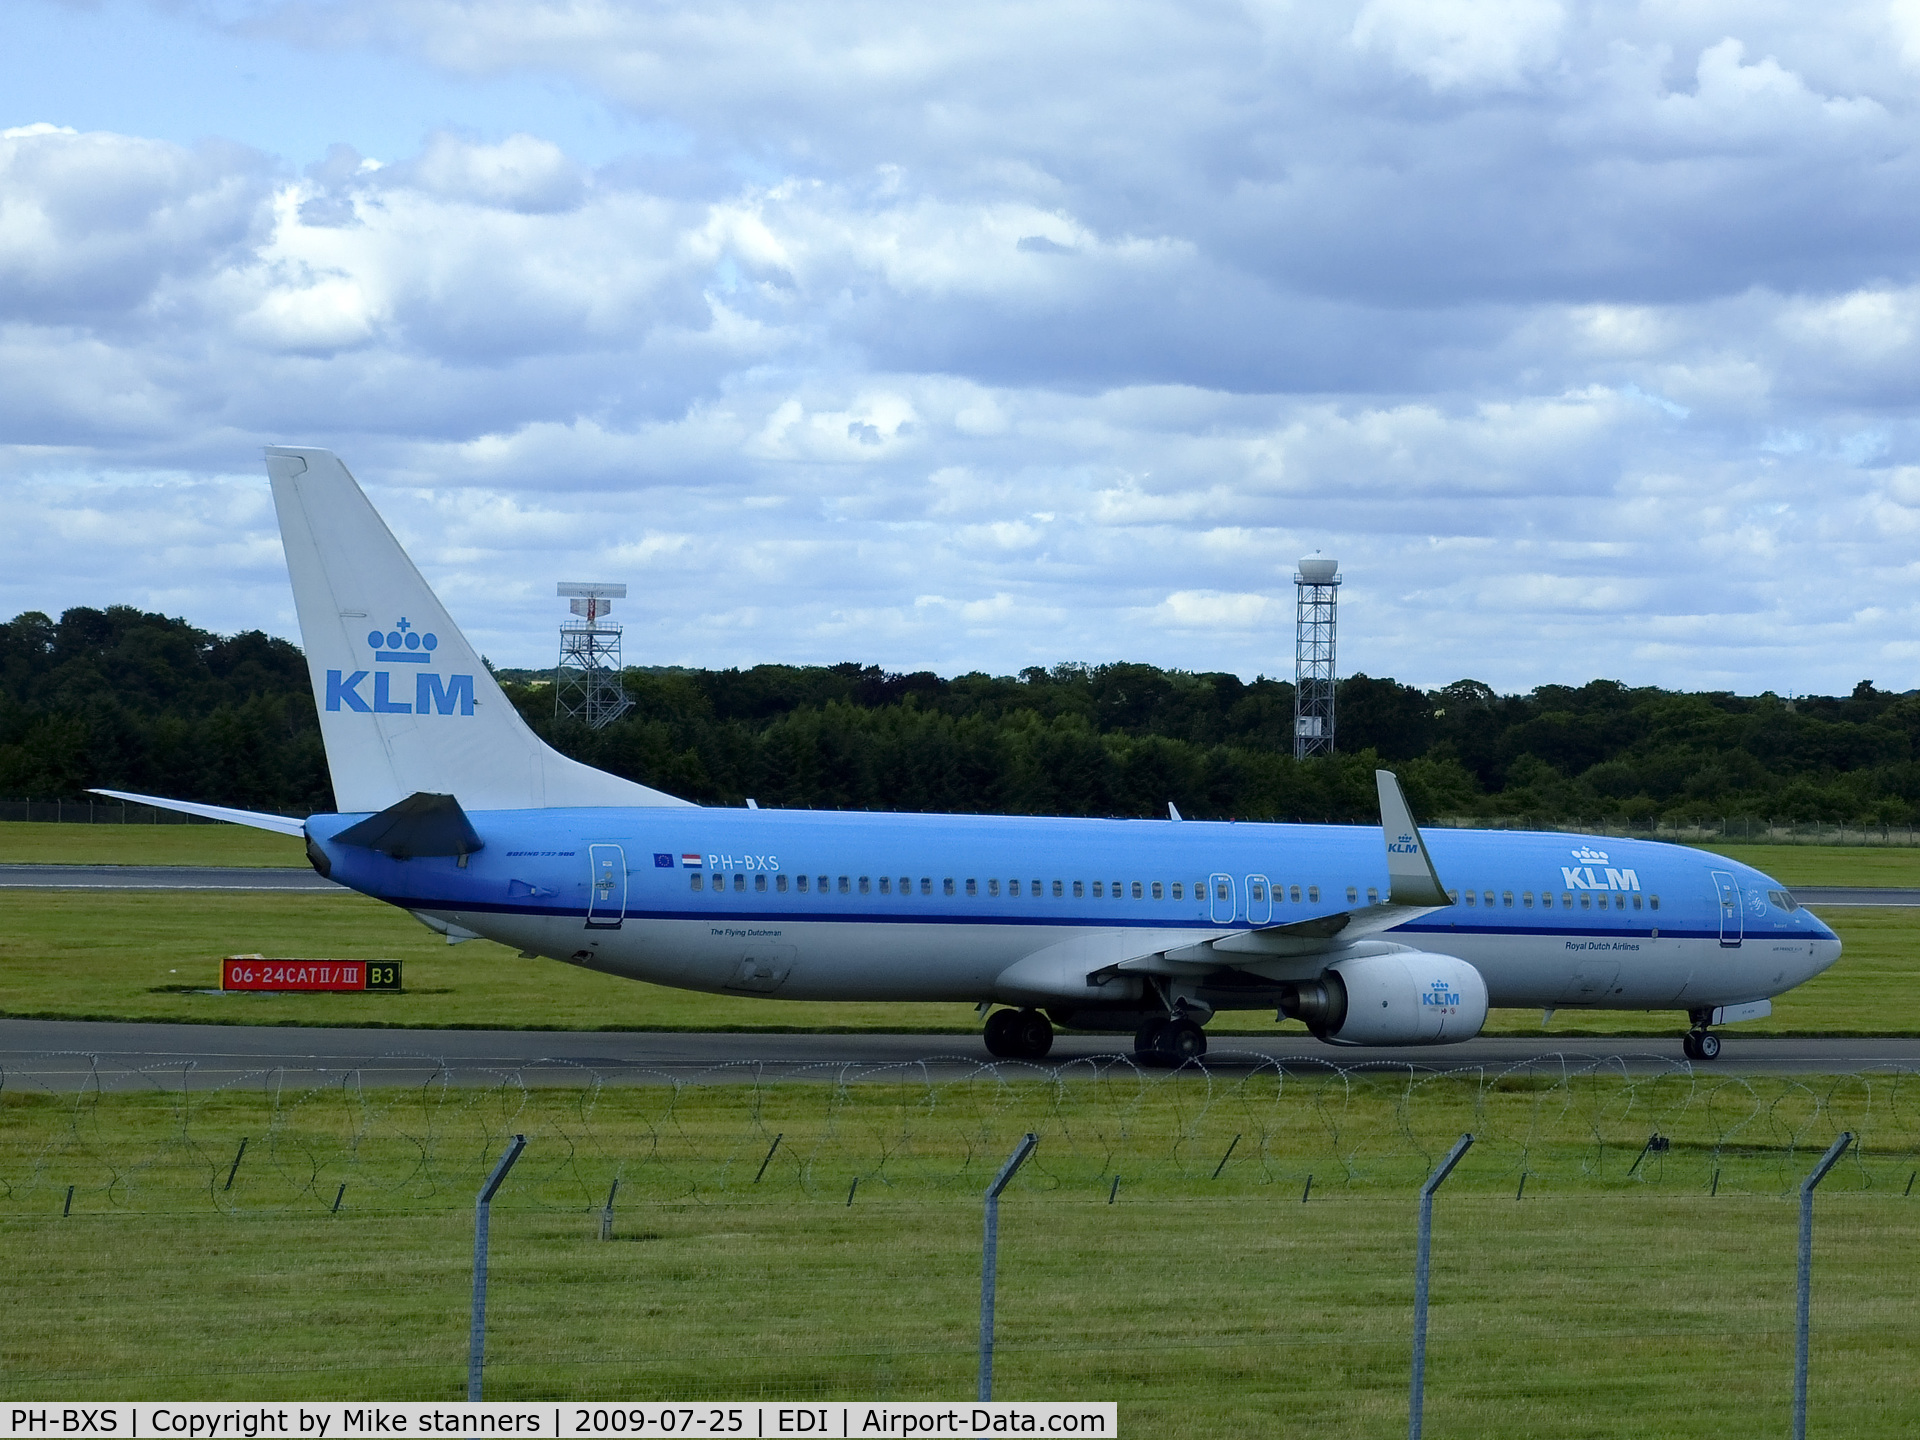 PH-BXS, 2001 Boeing 737-9K2 C/N 29602, KLM1285 Arrives at EDI From AMS